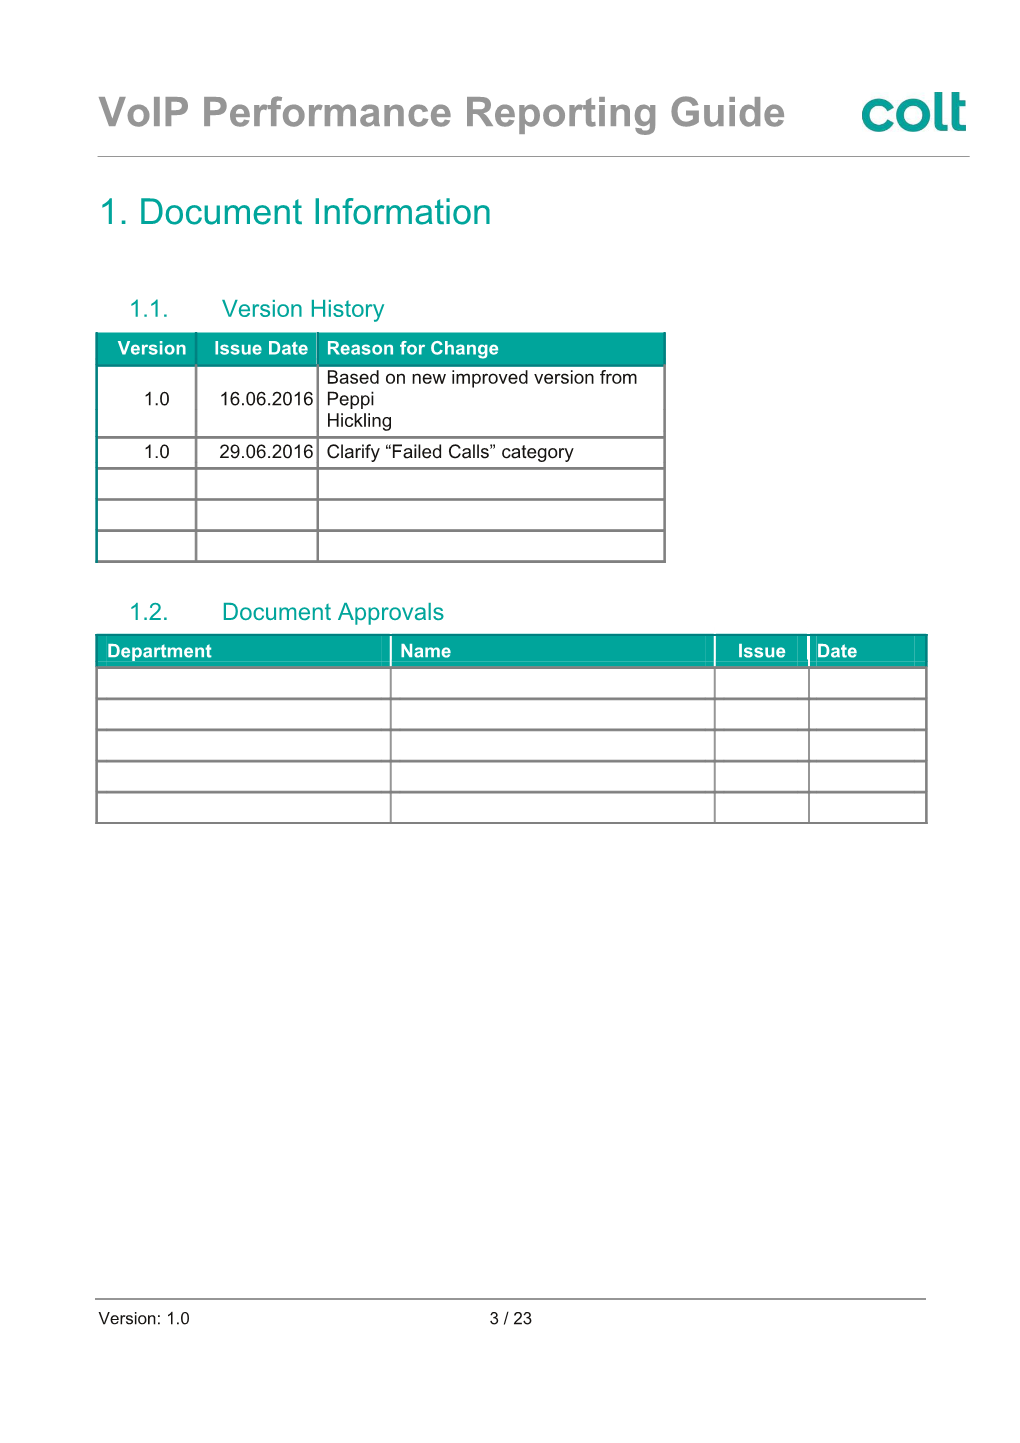 This Document Is the User Guide for the Performance Reporting for the Colt SIP Trunking